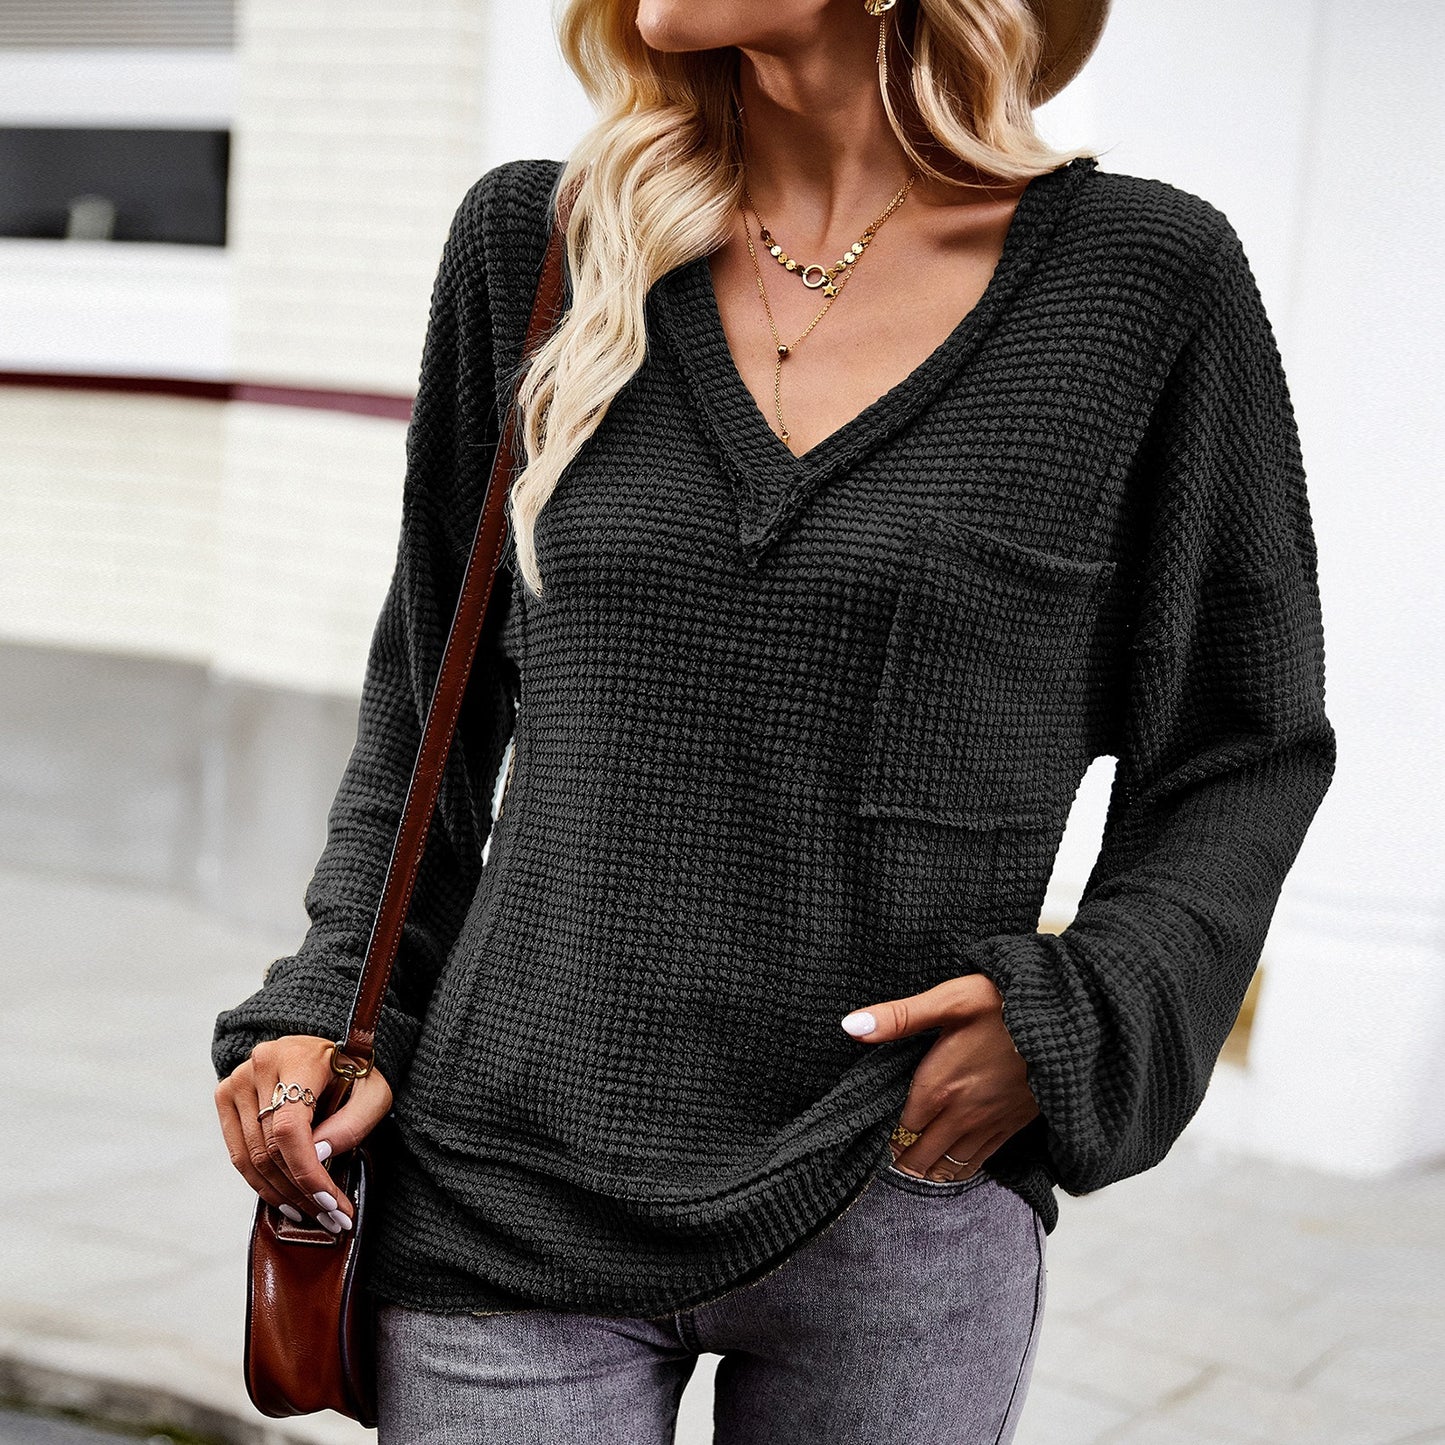 Solid color knitted shirt women's V-neck long sleeved top